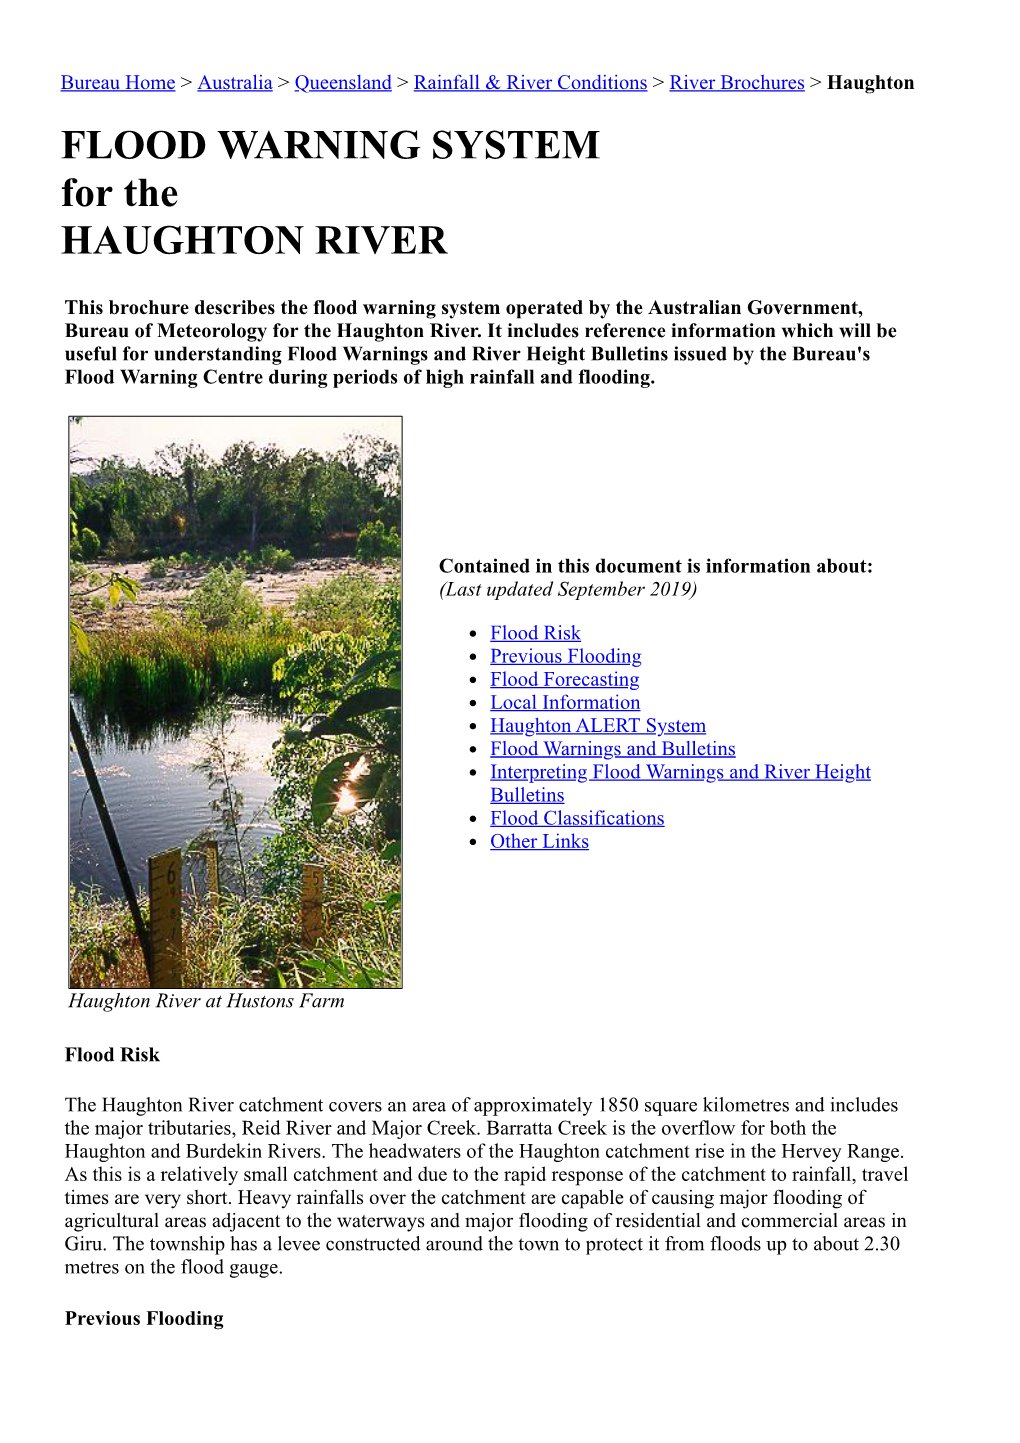 FLOOD WARNING SYSTEM for the HAUGHTON RIVER